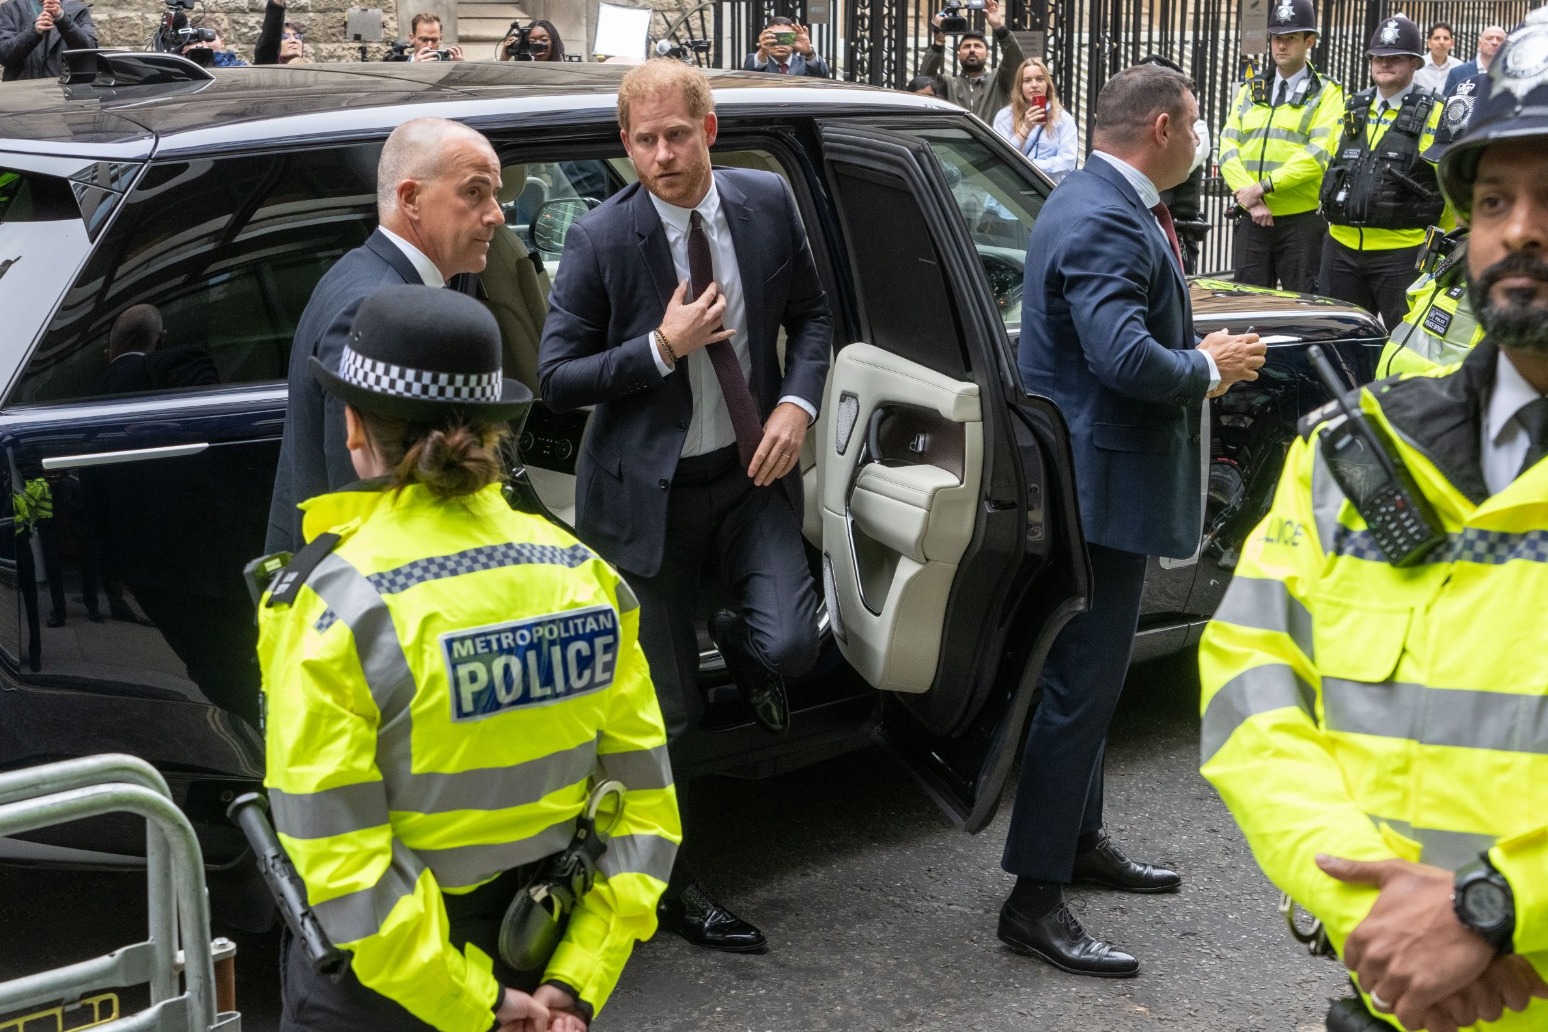 Duke of Sussex arrives at High Court to give evidence in hacking trial 